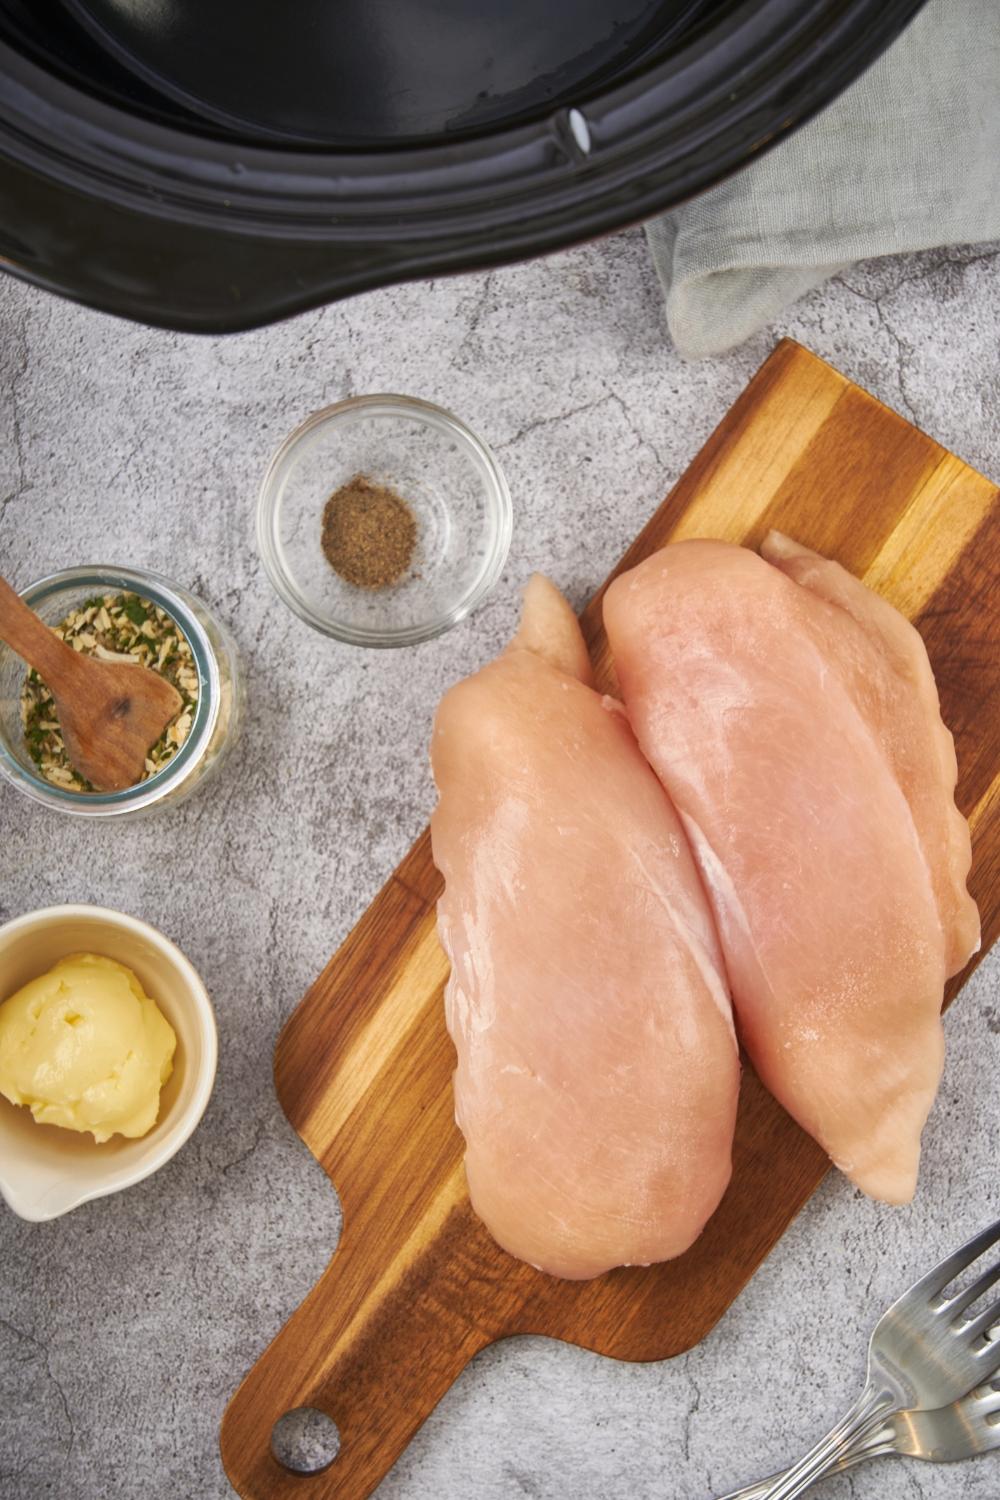 An assortment of ingredients including two raw chicken breasts on a wooden cutting board and small bowls of salt and pepper, a seasoning blend, and butter.